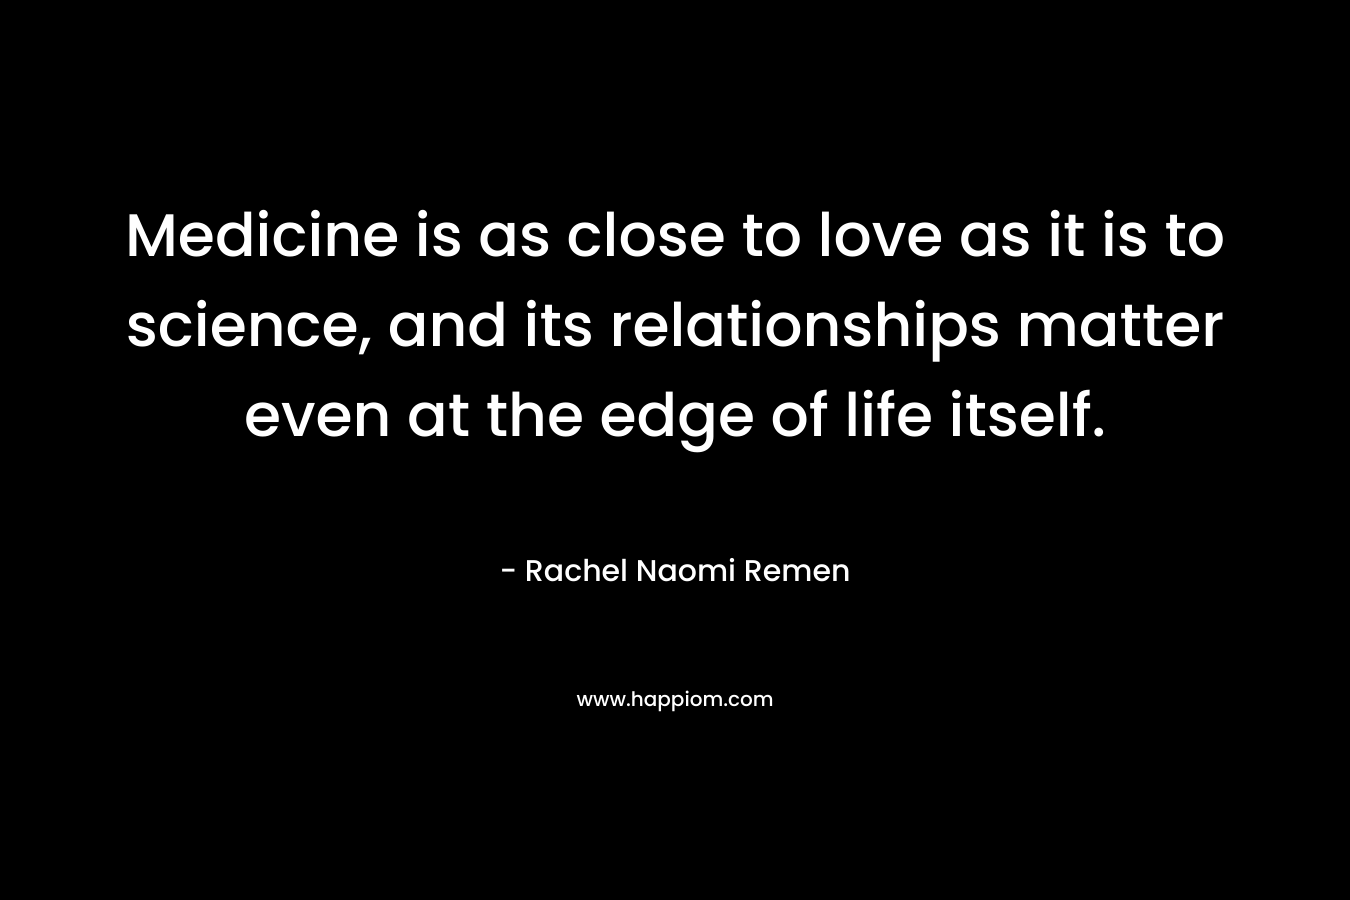 Medicine is as close to love as it is to science, and its relationships matter even at the edge of life itself.